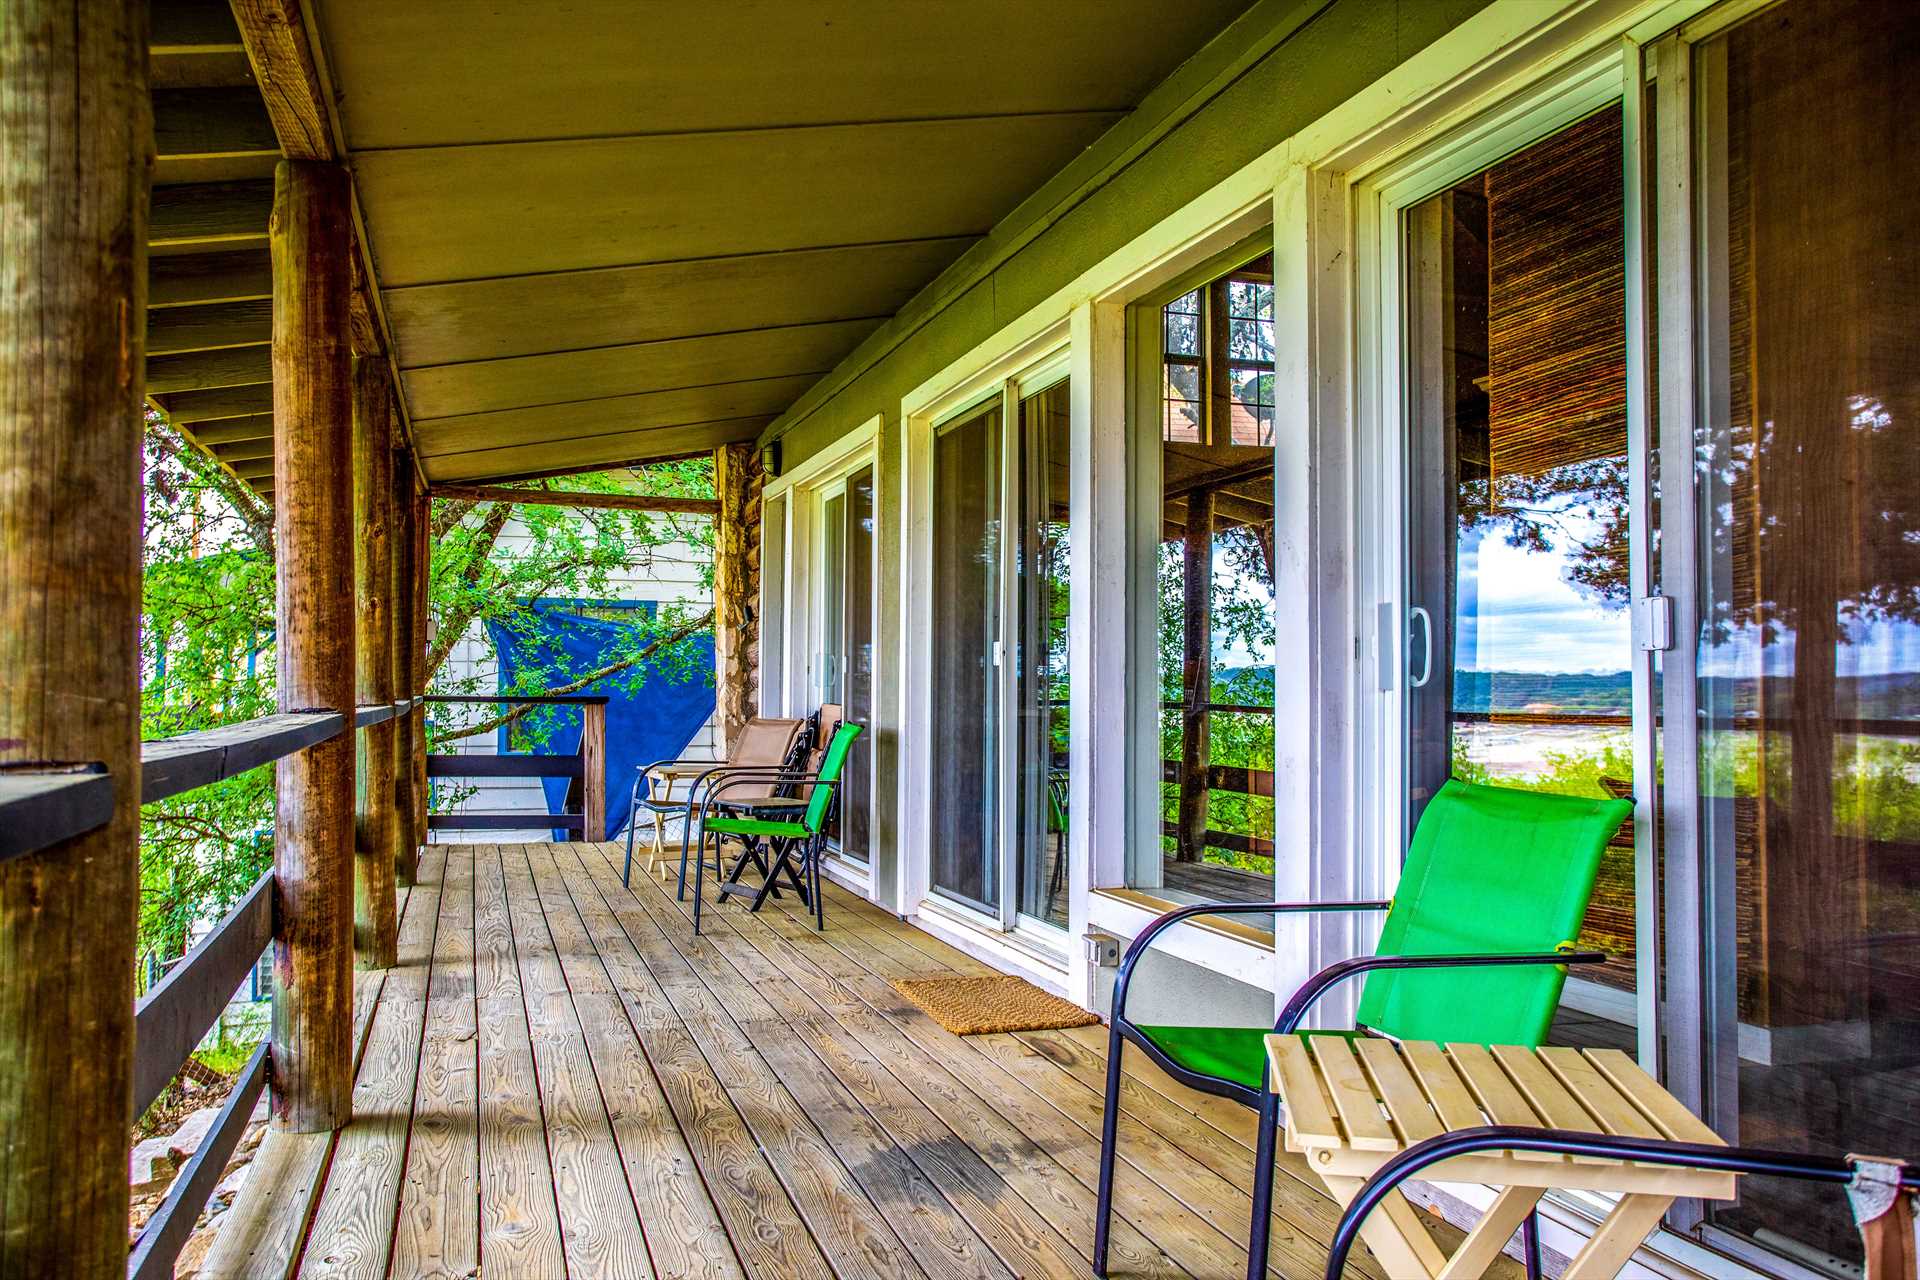                                                 Take in those amazing views of the lake and Hill Country from the comfort of the shaded deck.